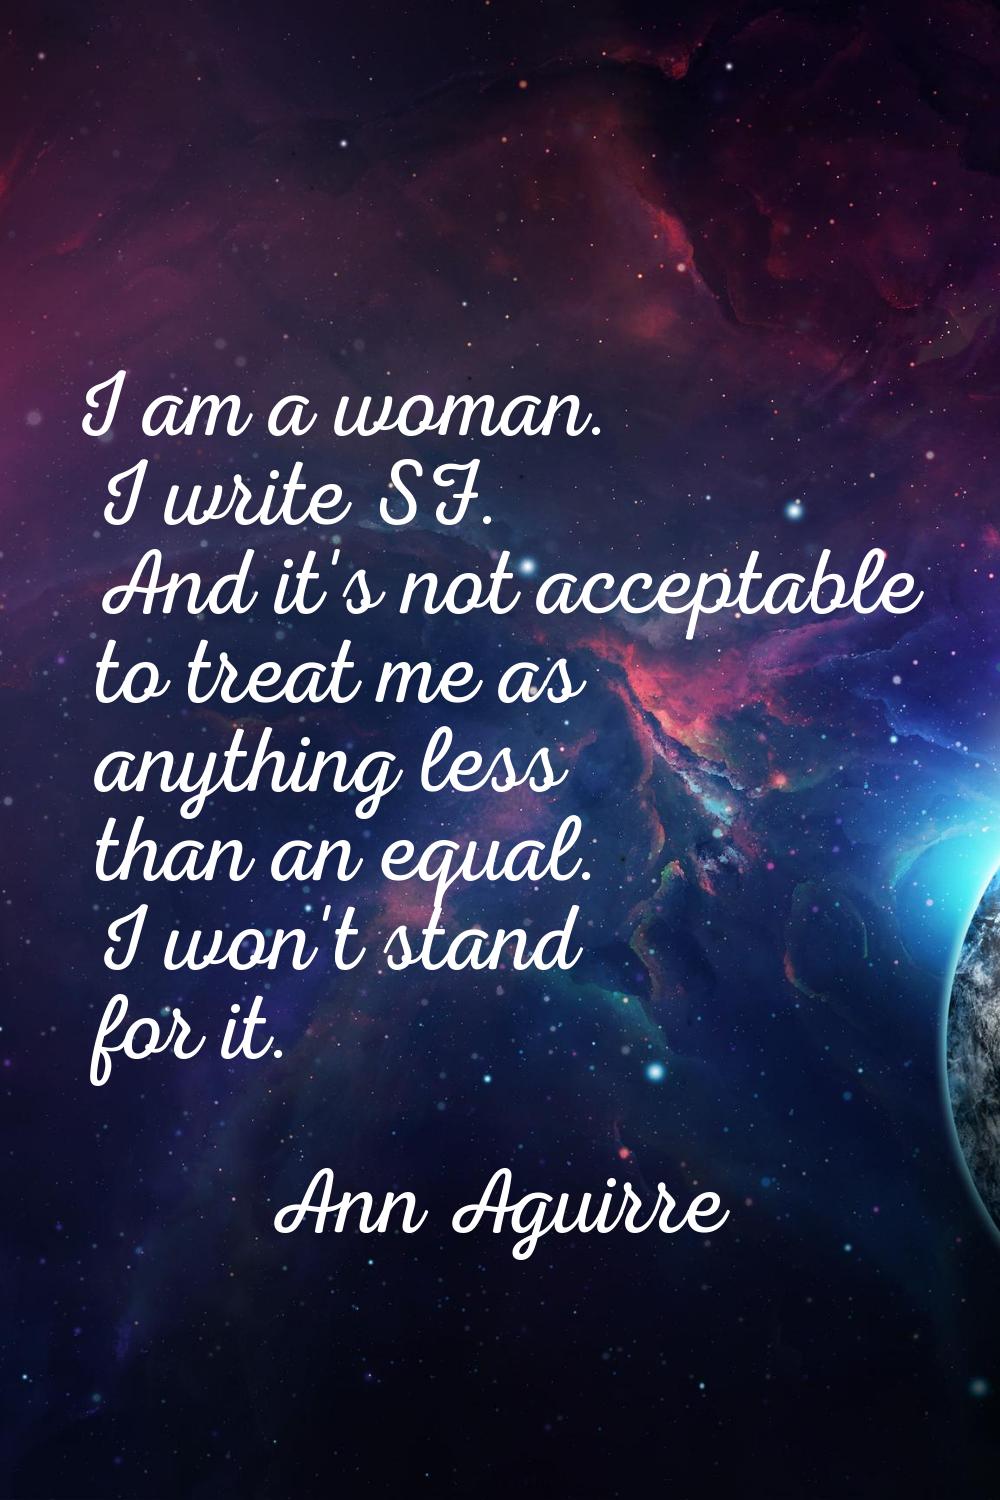 I am a woman. I write SF. And it's not acceptable to treat me as anything less than an equal. I won